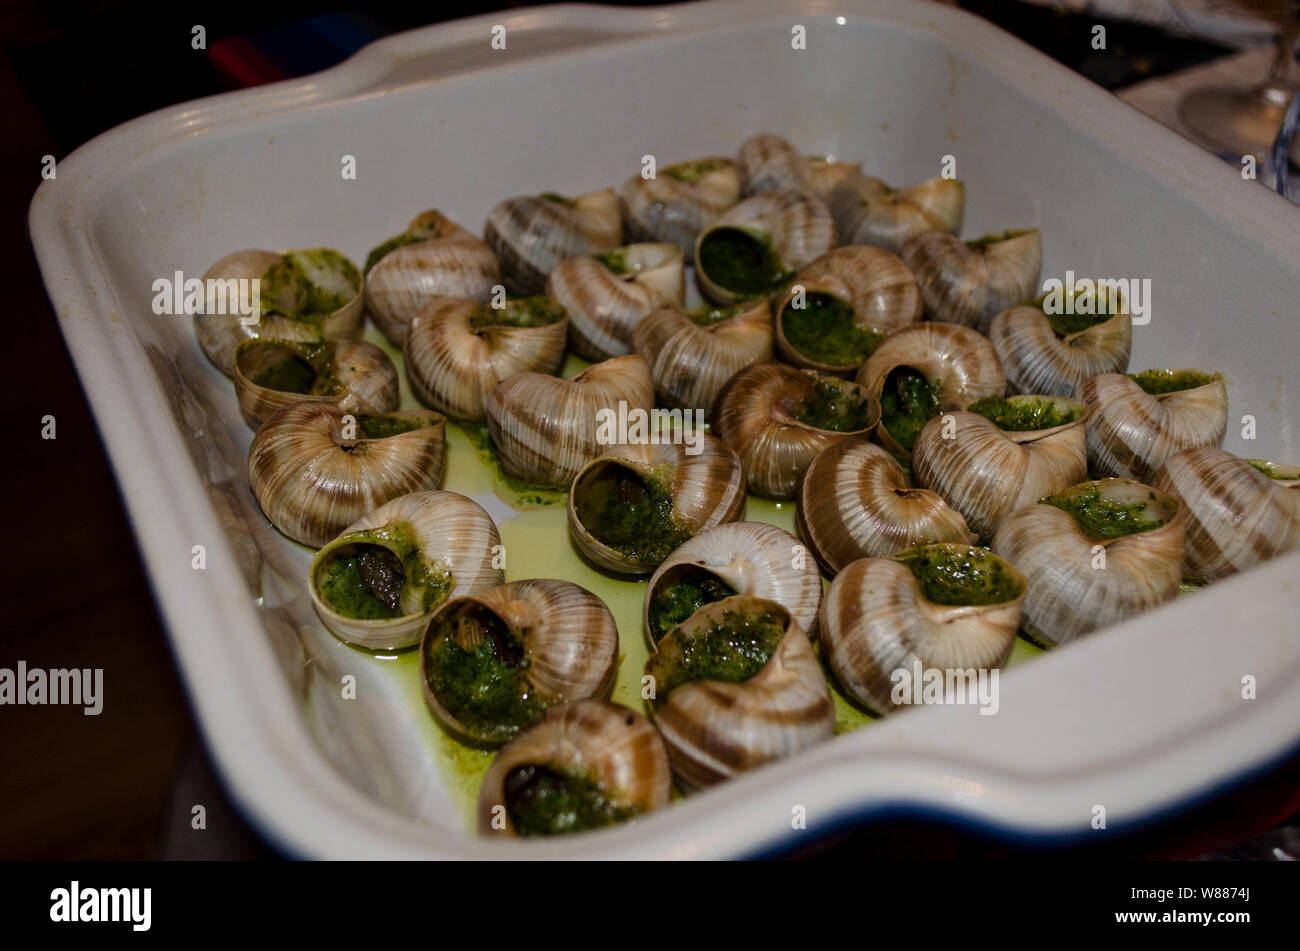 Escargots or snails in Garlic and Parsley Butter. Cooking traditional french escargots in garlic butter. Stock Photo